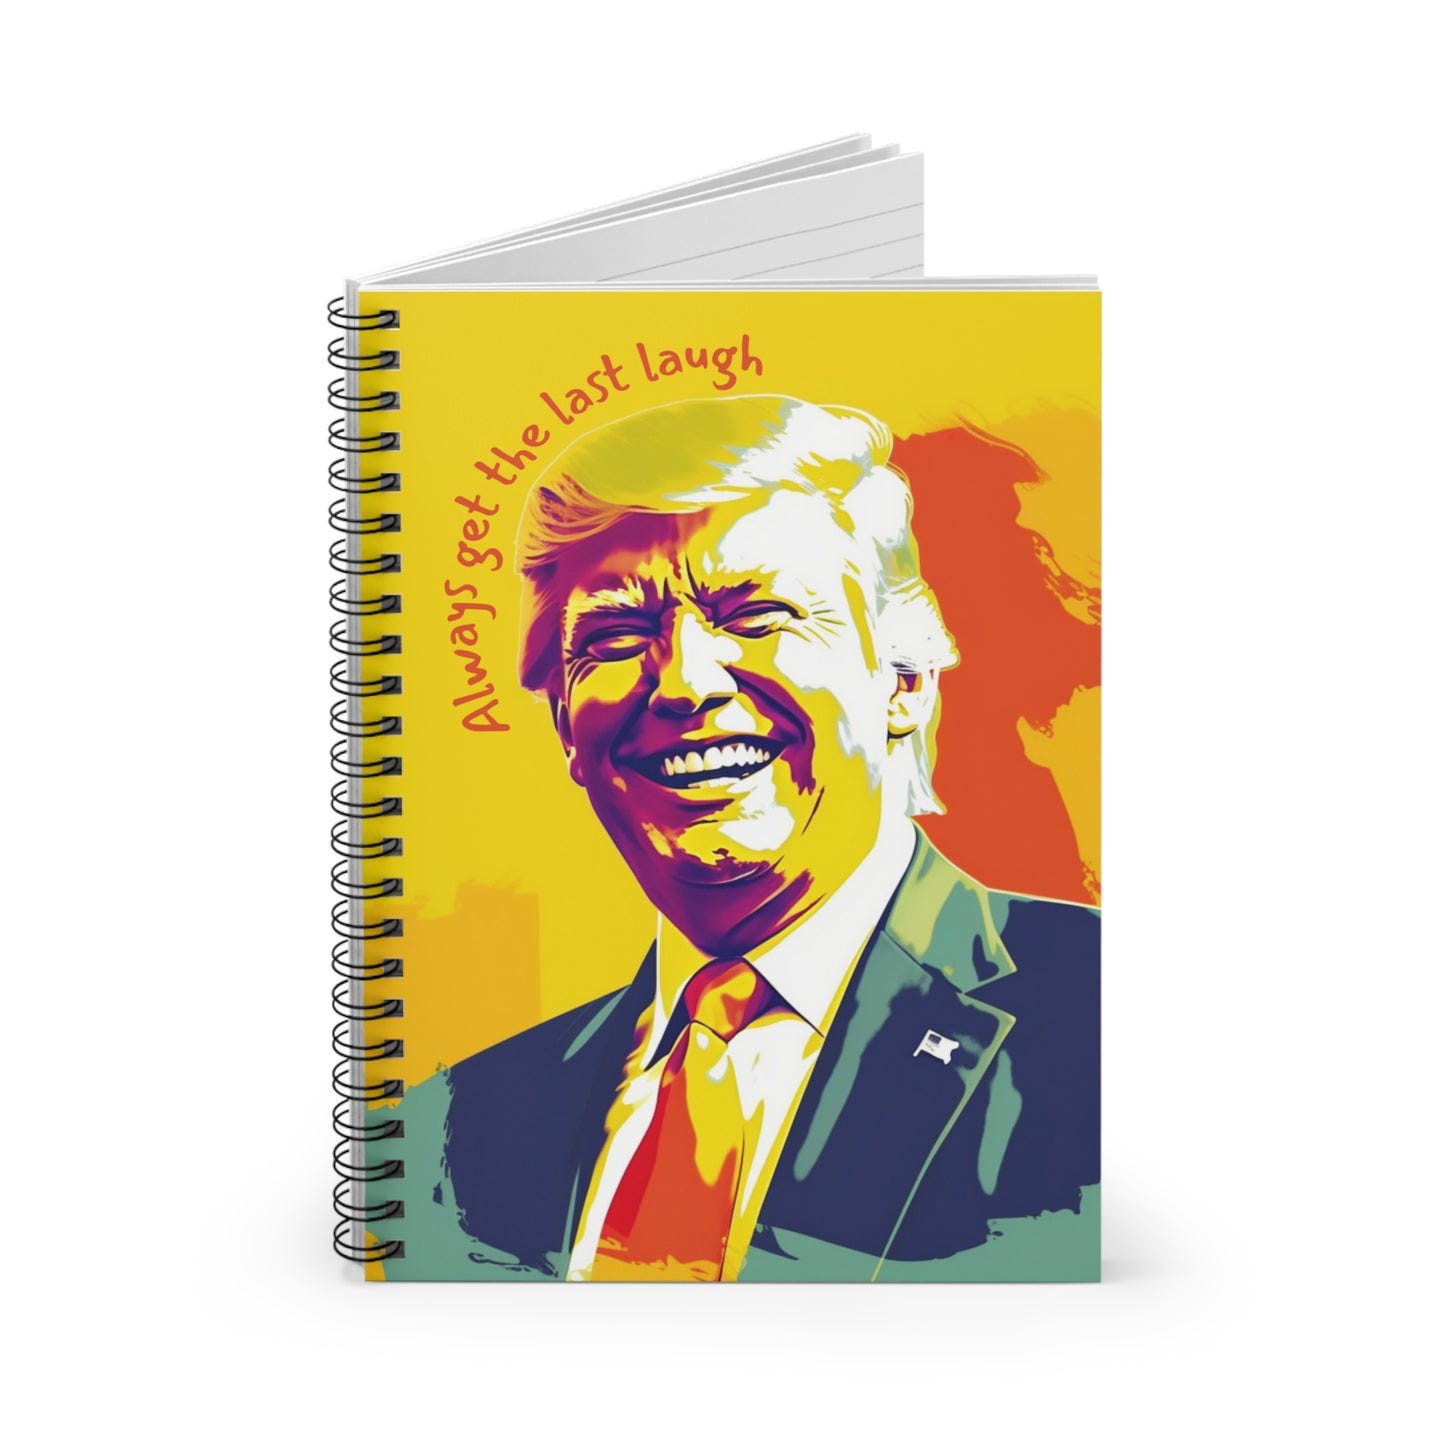 Trump's Last Laugh Spiral Notebook - Ruled Line